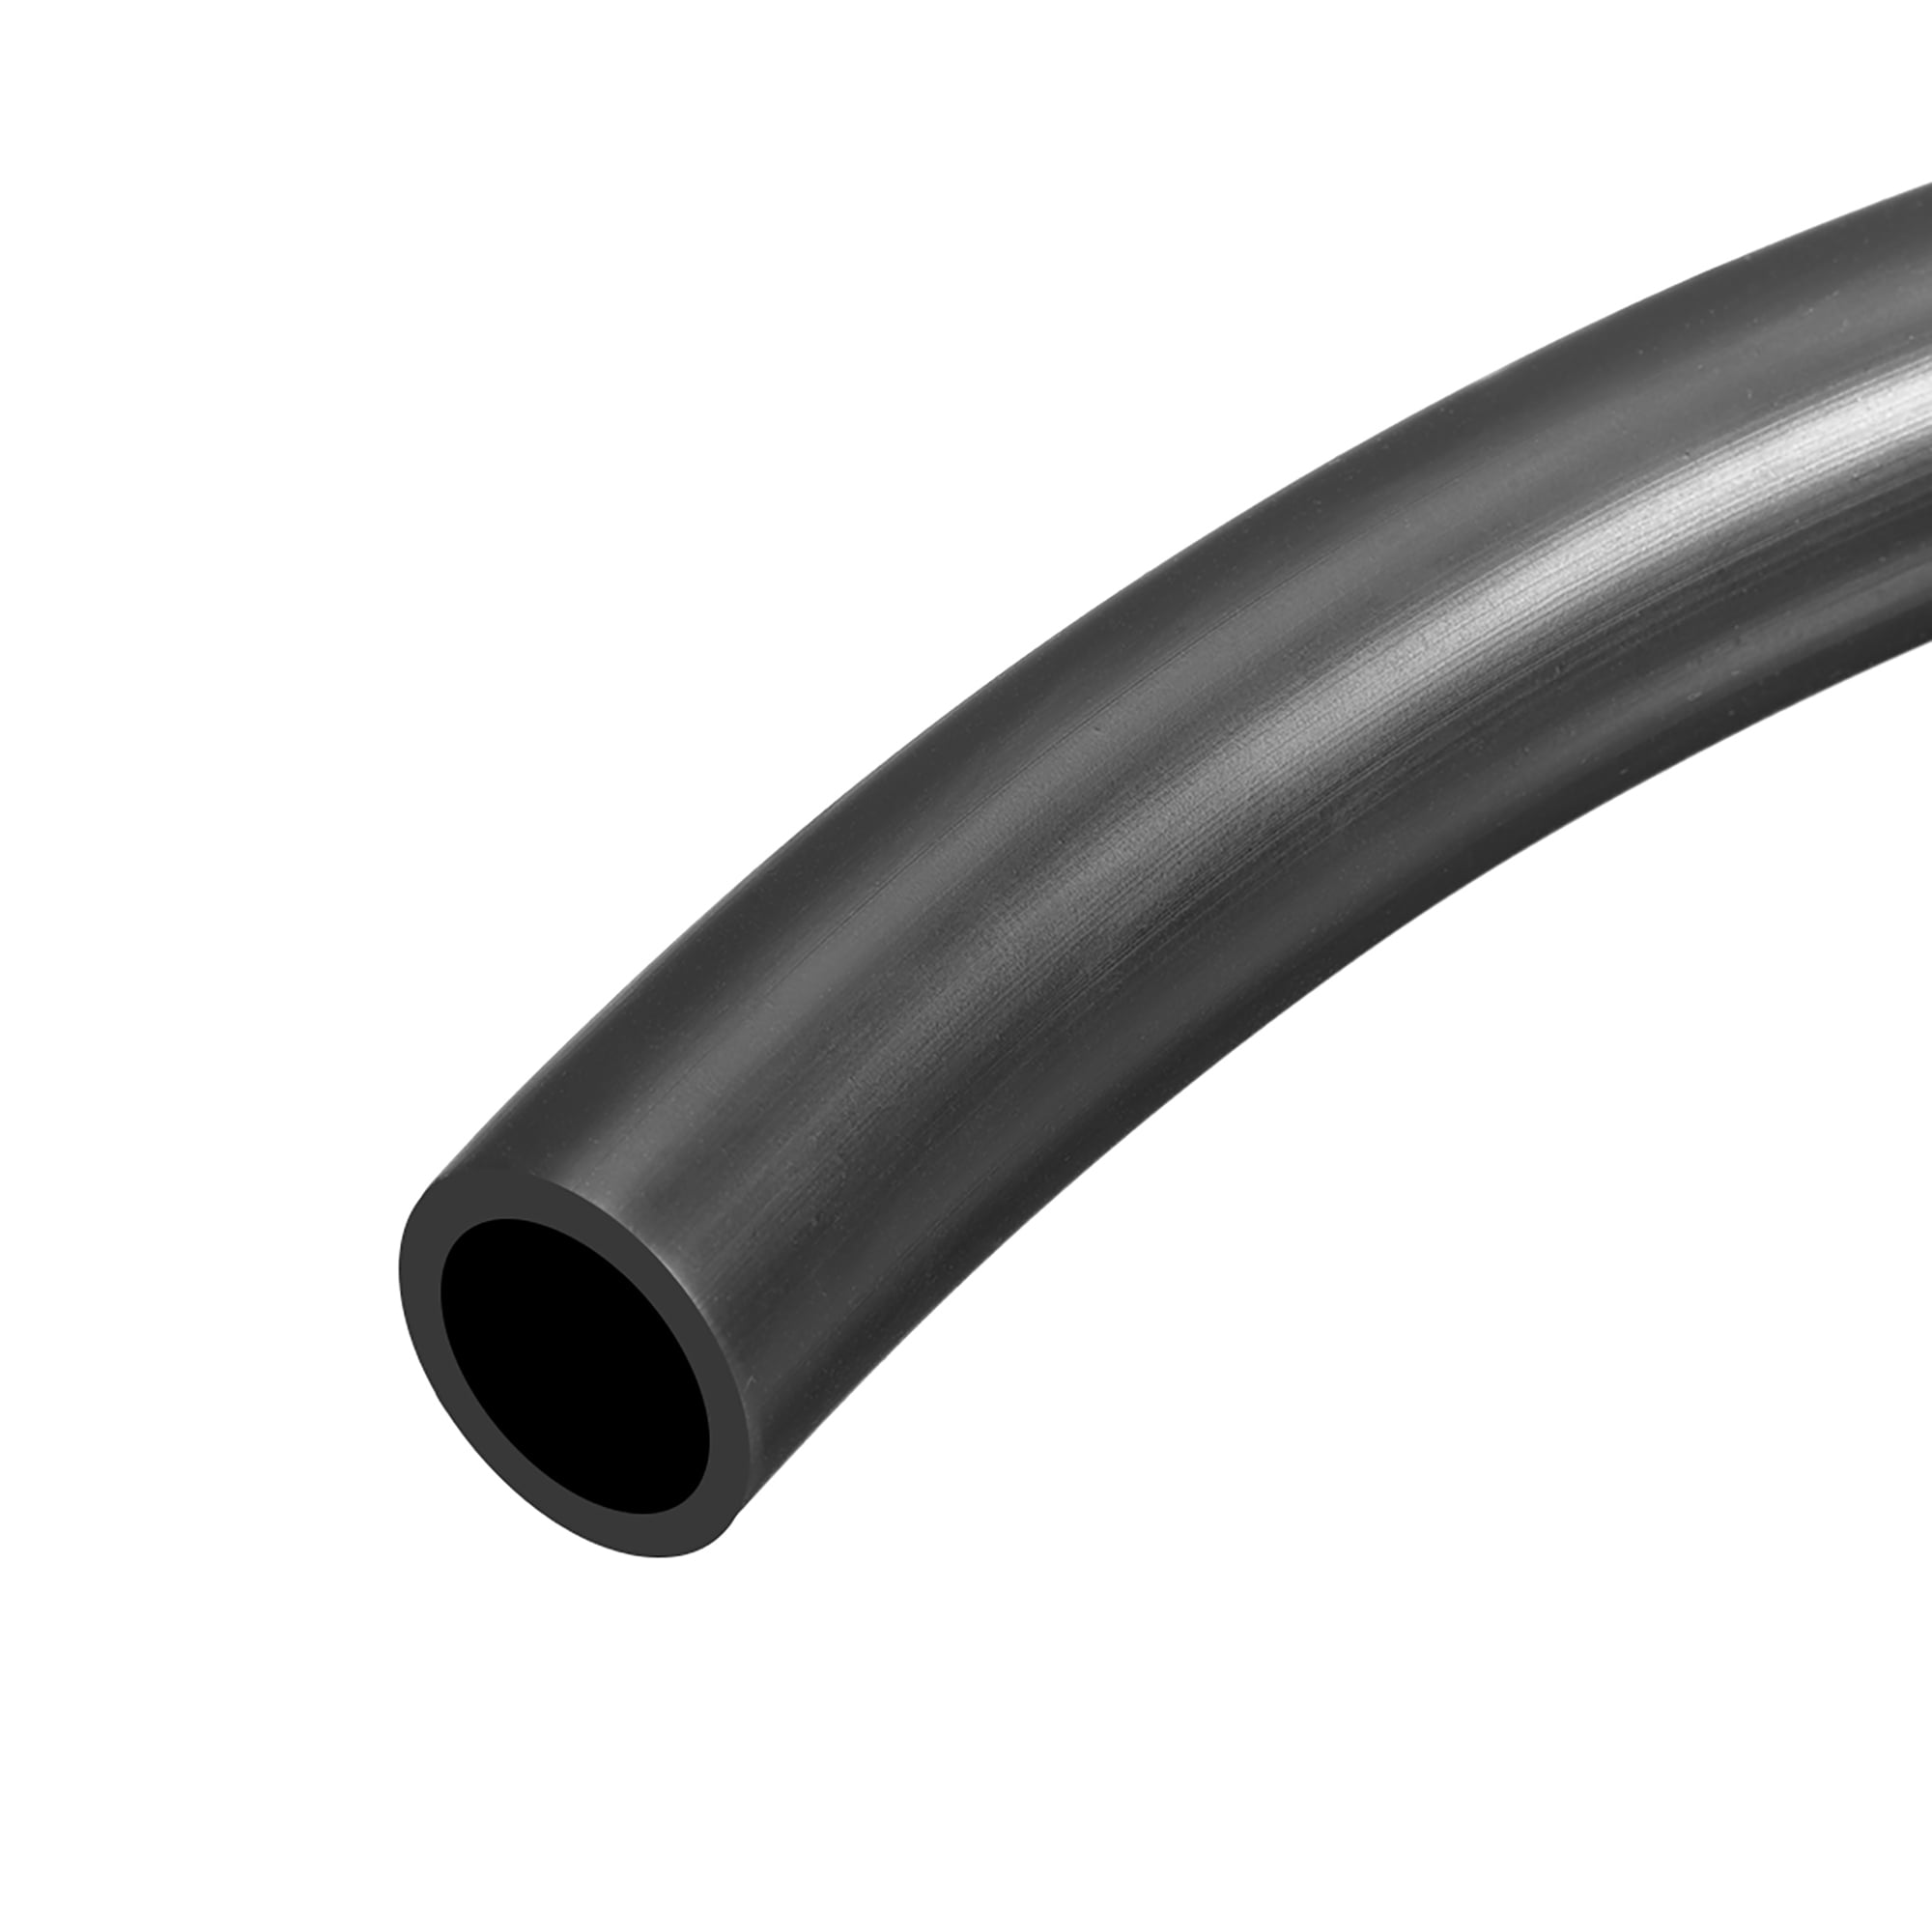 uxcell 1/4 ID Fuel Line Hose 15/32 OD 3.3ft Oil Tubing Black for Small Engines 